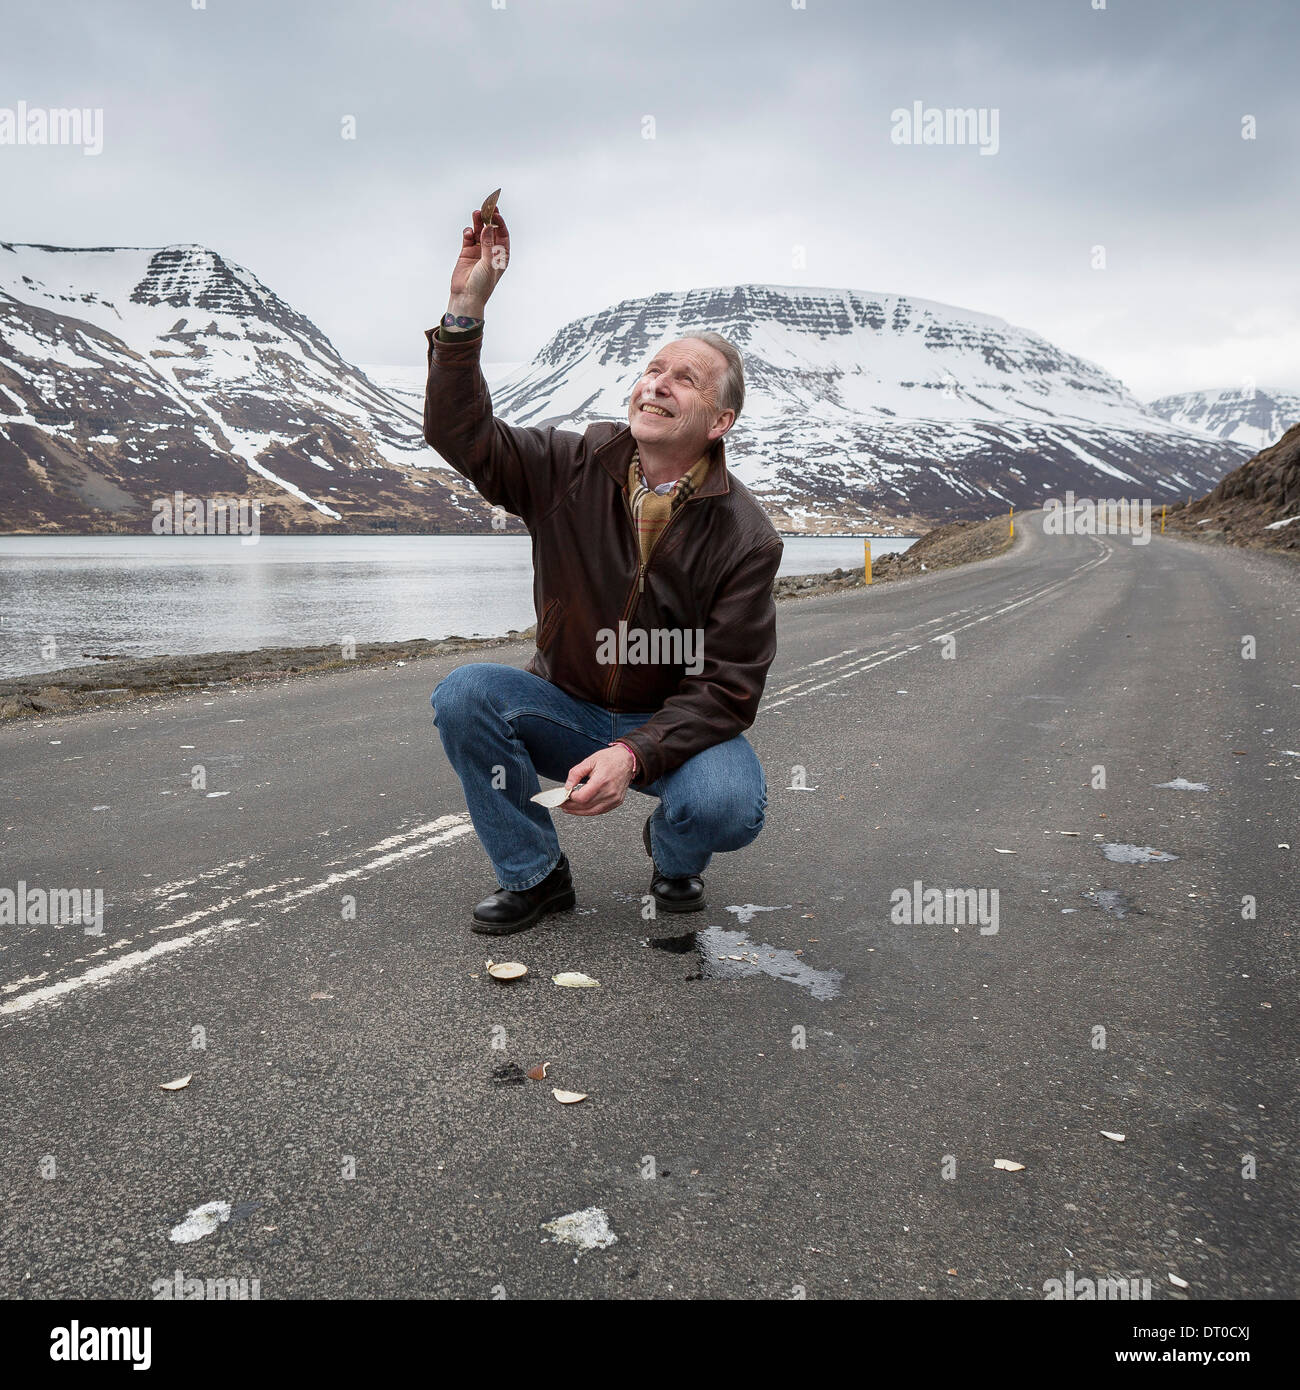 Geophysicist in the road trying to get the attention of the birds flying above,  Sugandafjordur, Western, Iceland Stock Photo